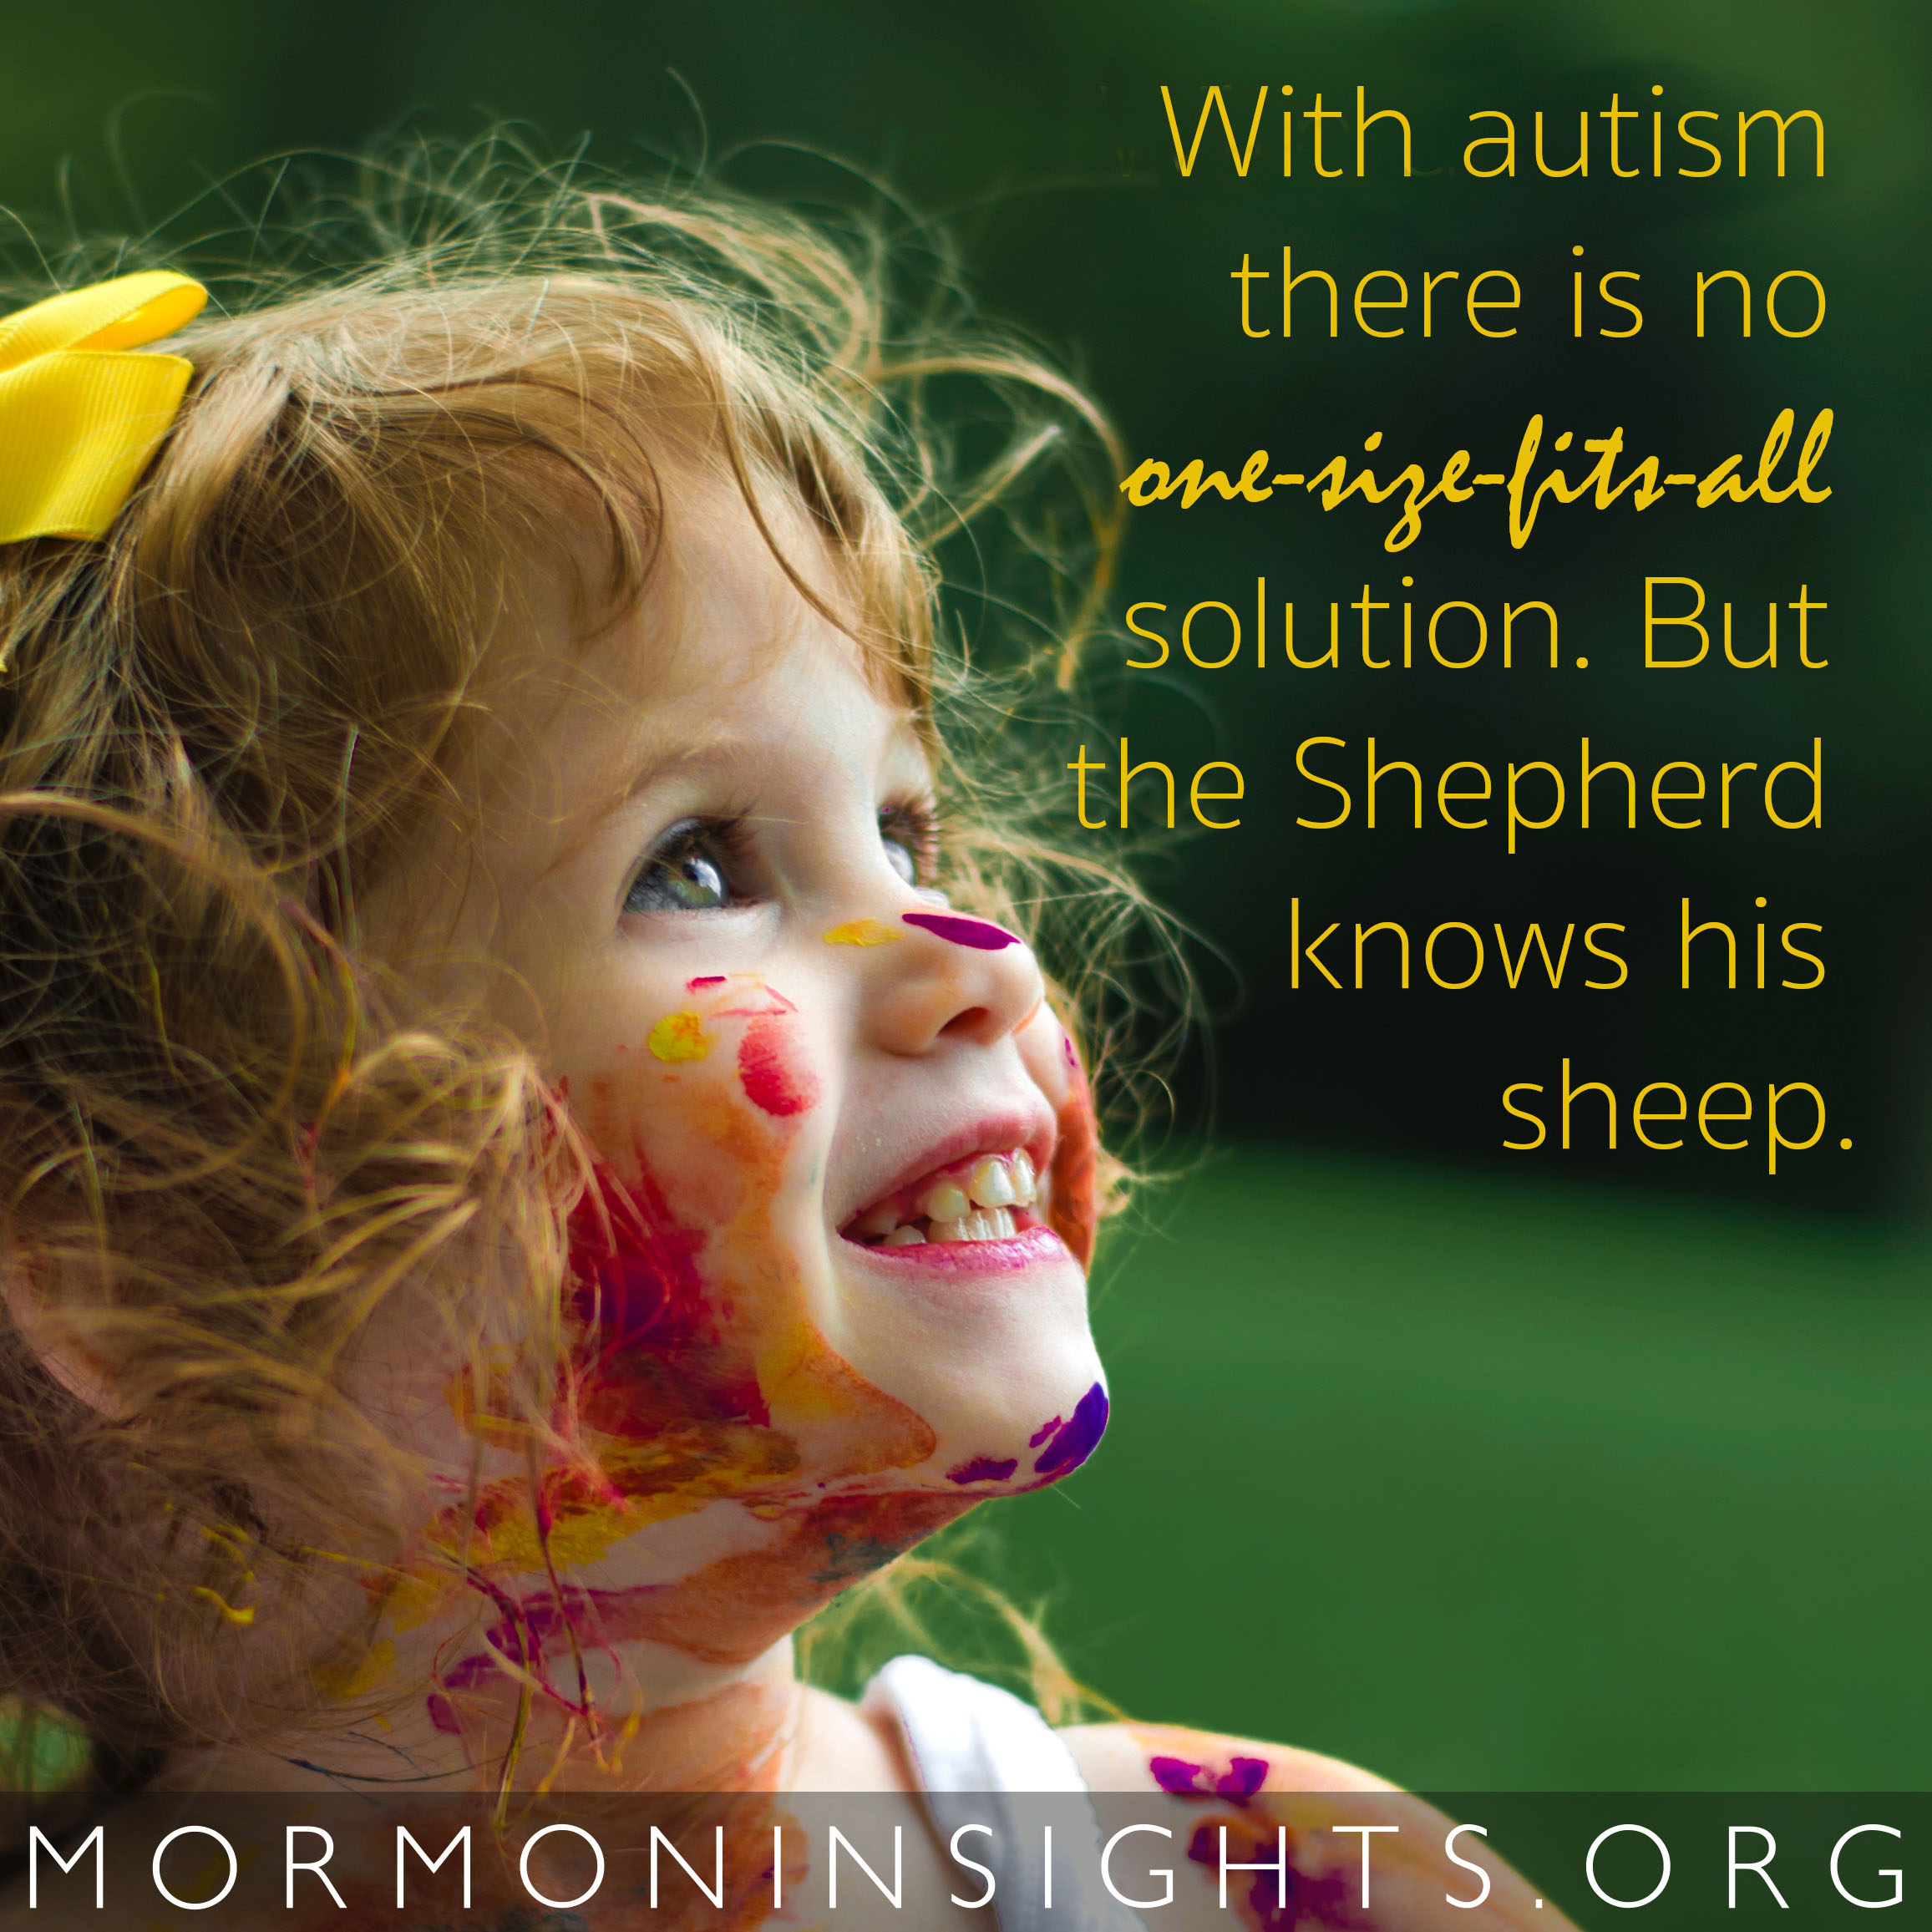 With autism, there is not one-size-fits-all solution. But the Shepherd knows his sheep.